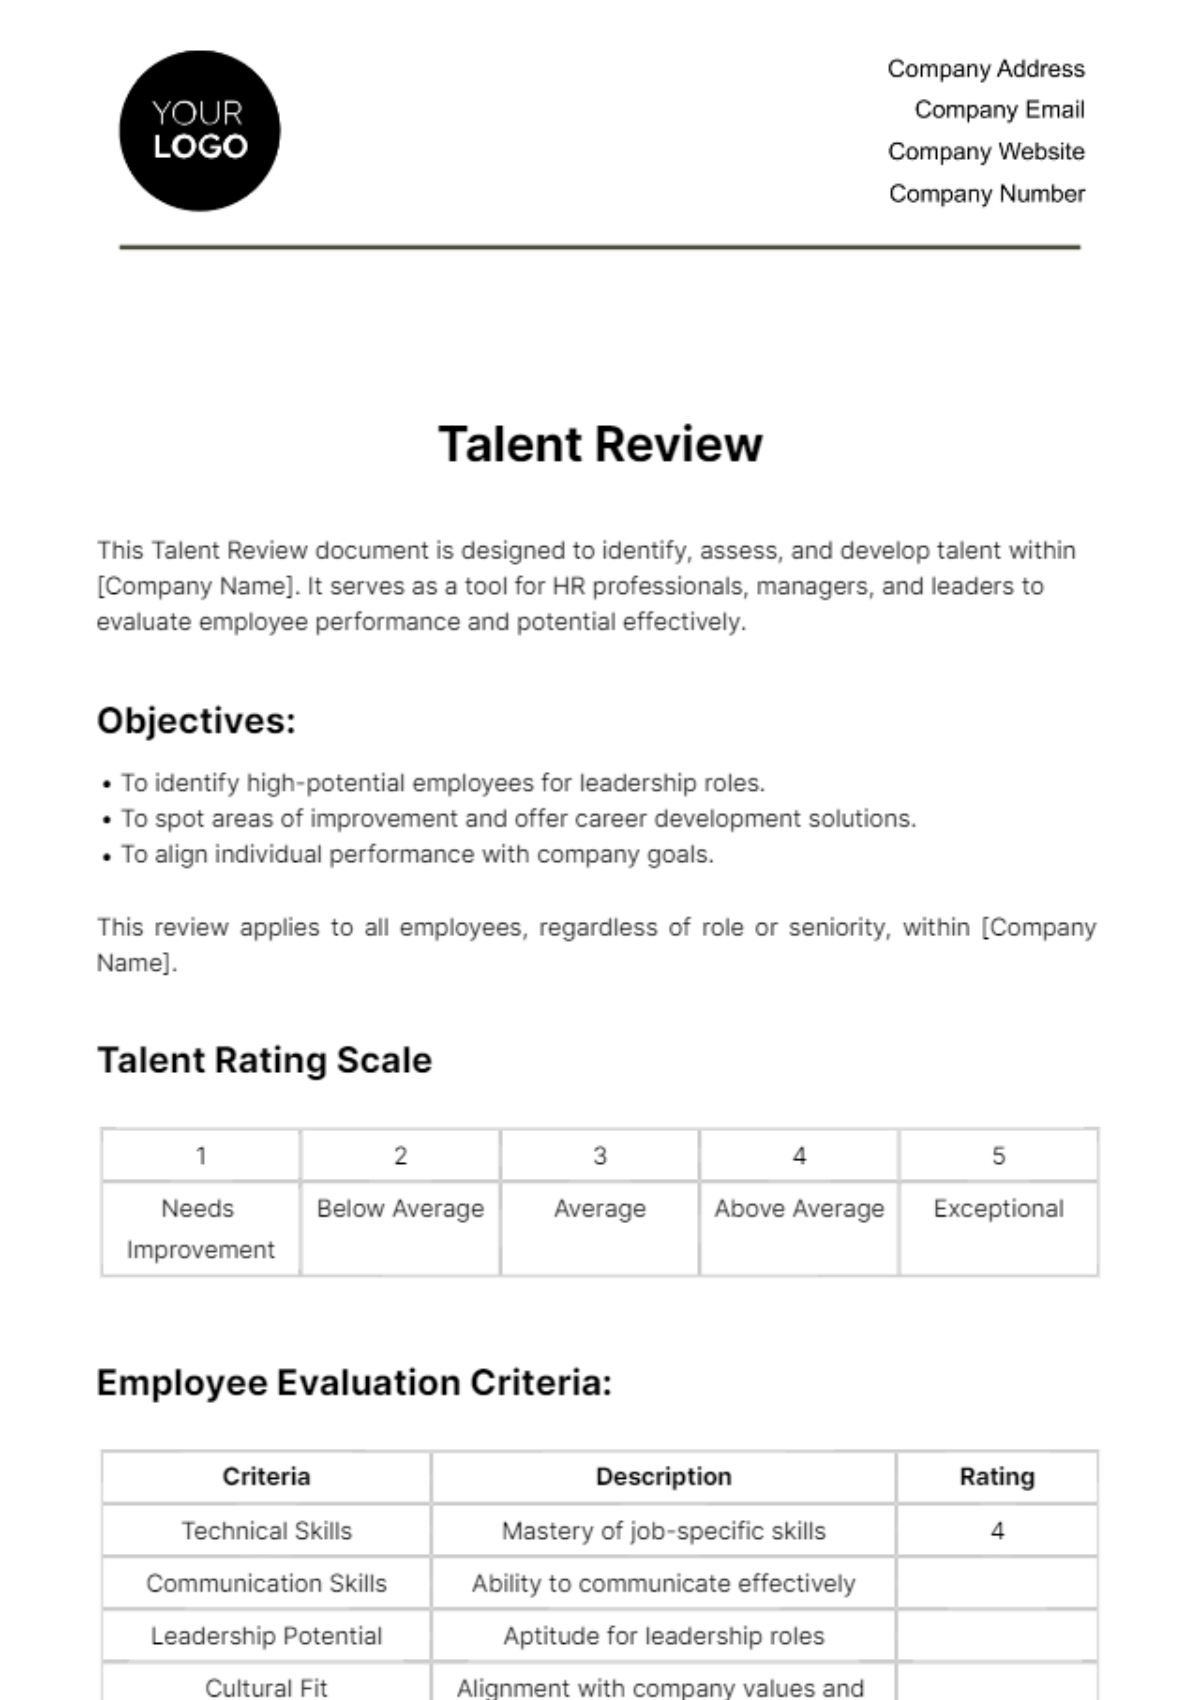 Free Talent Review HR Template